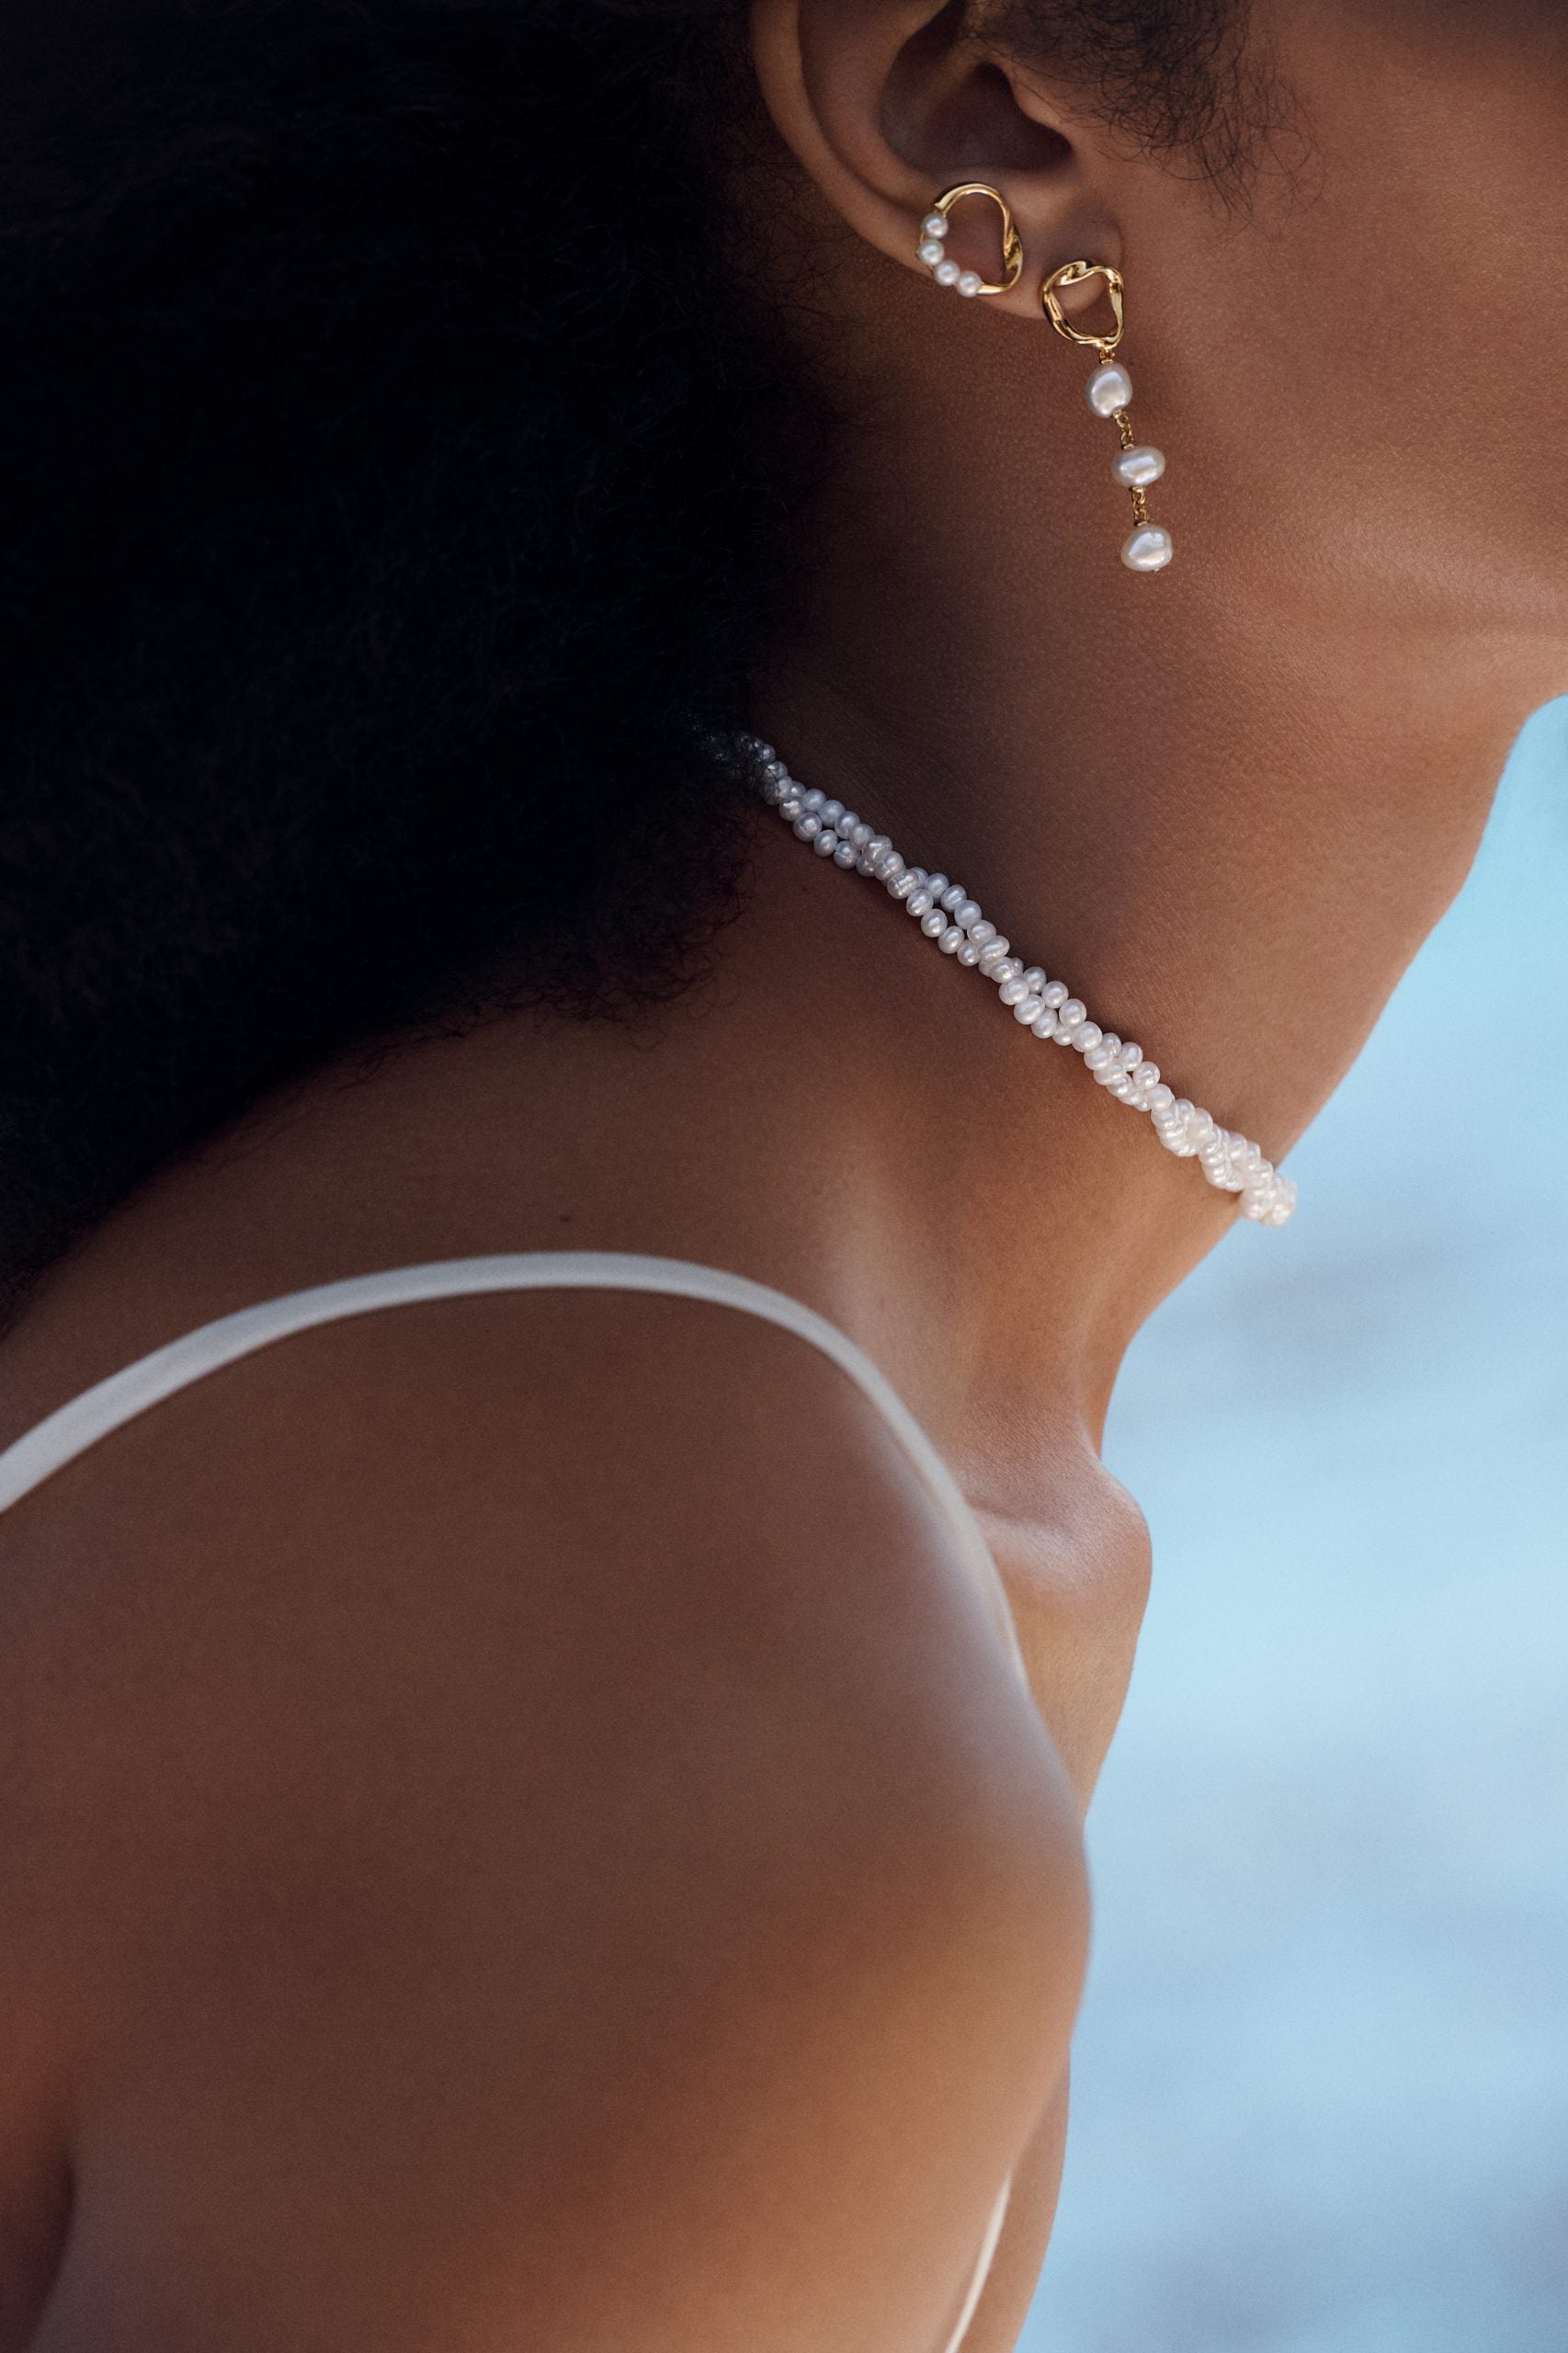 Pandora’s New Collection Captures The Essence Of Minimalism